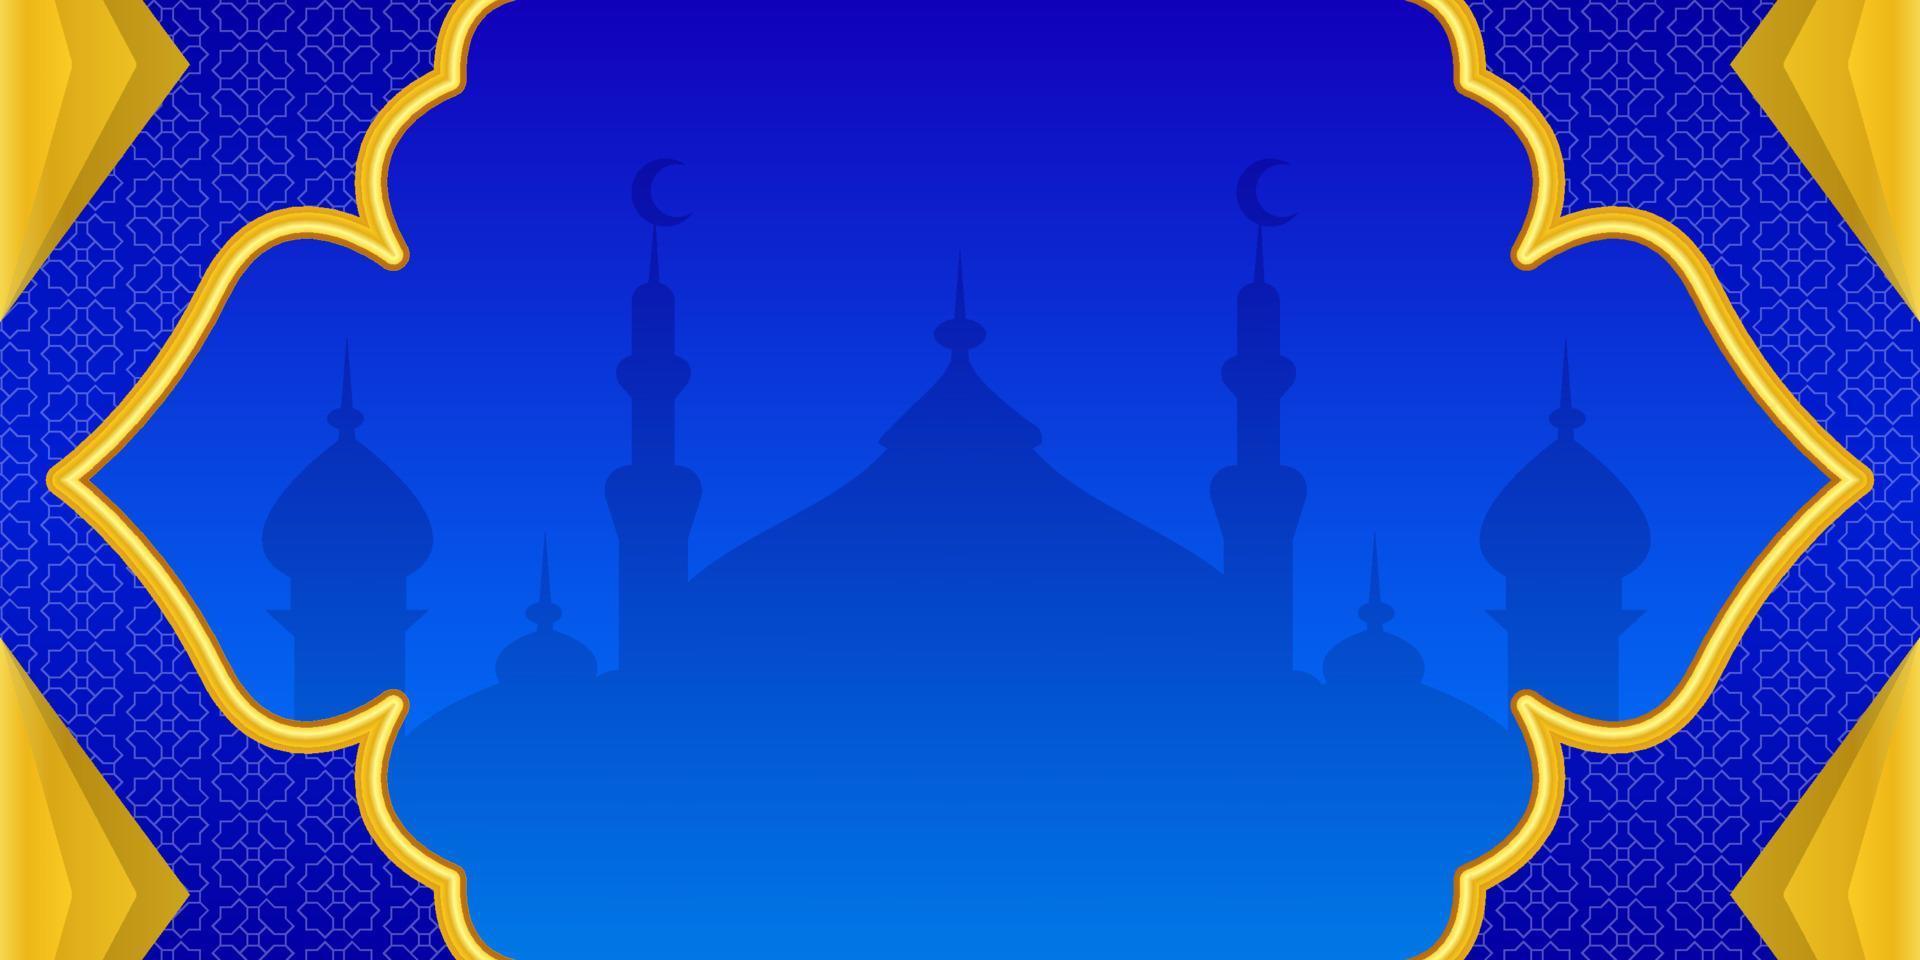 Islamic Blue Banner Background Template vector